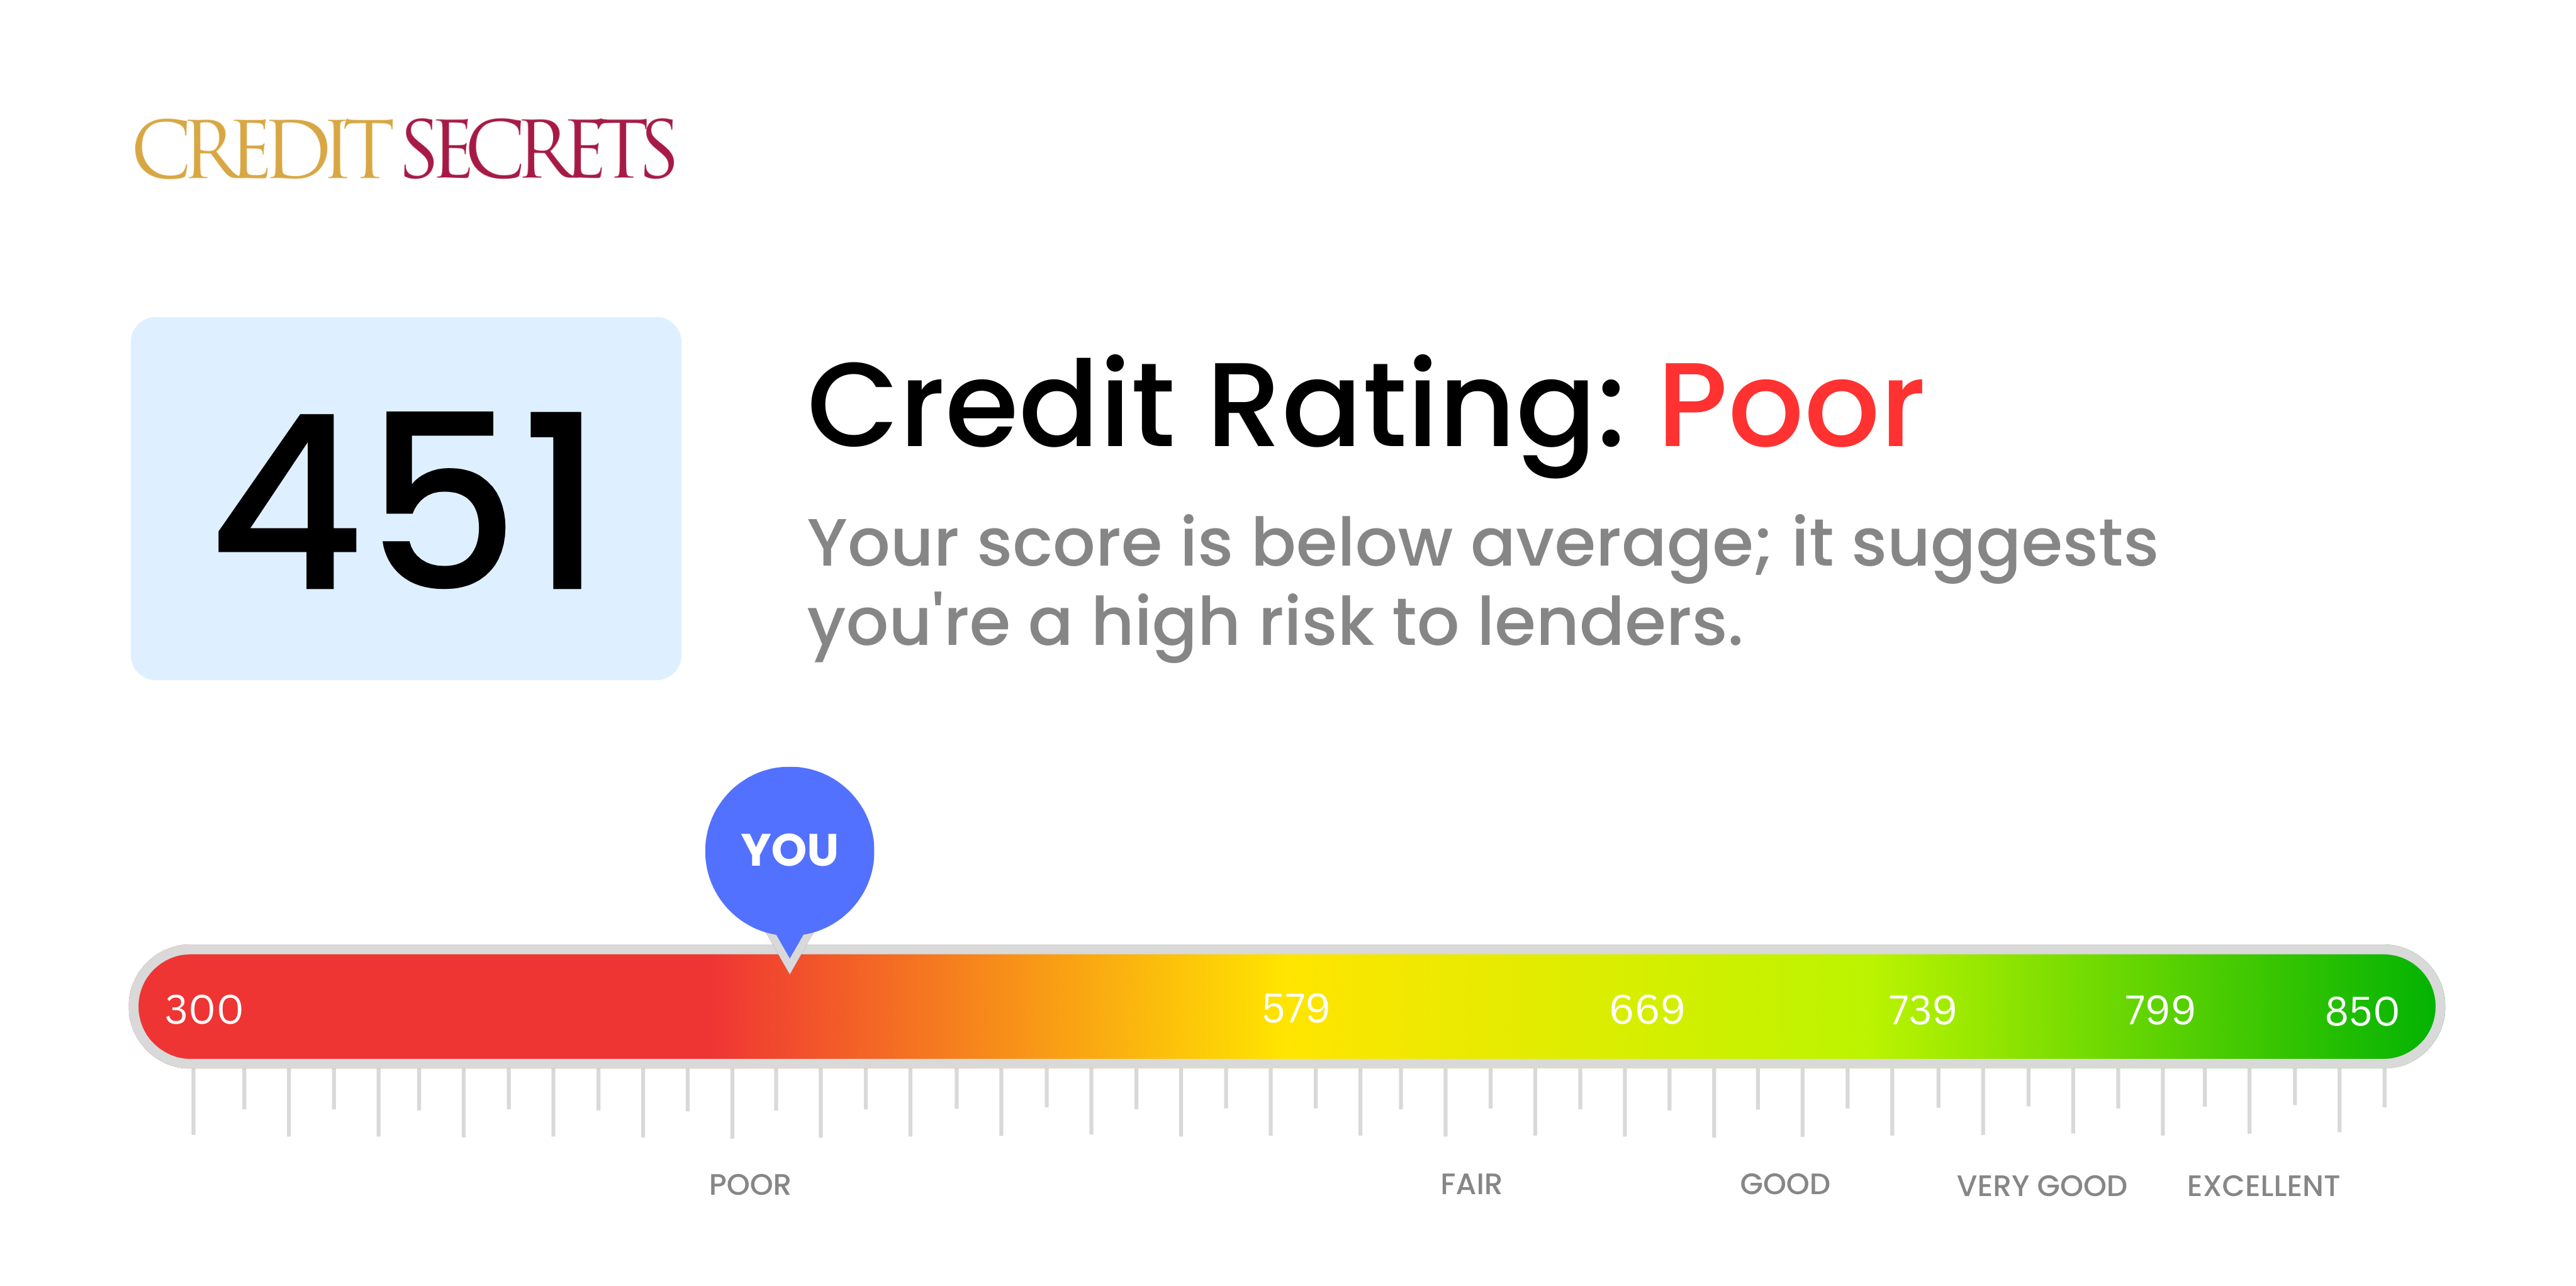 Is 451 a good credit score?